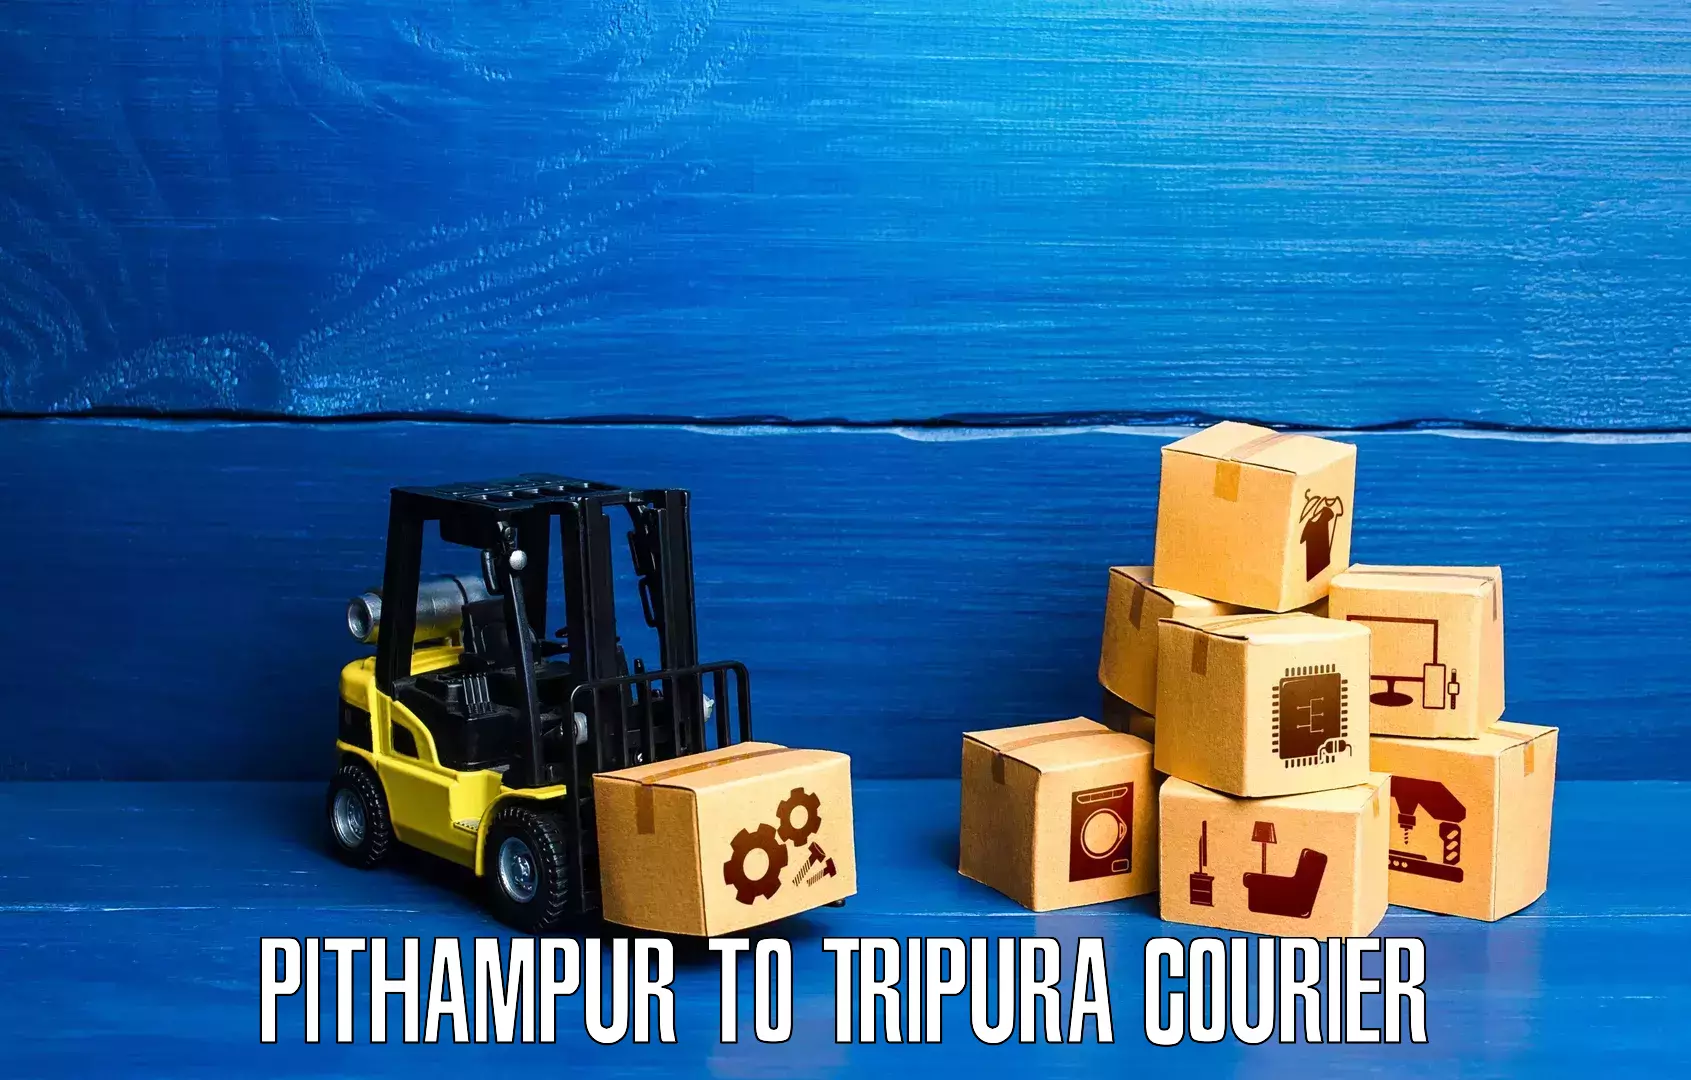 Quality courier partnerships Pithampur to Udaipur Tripura